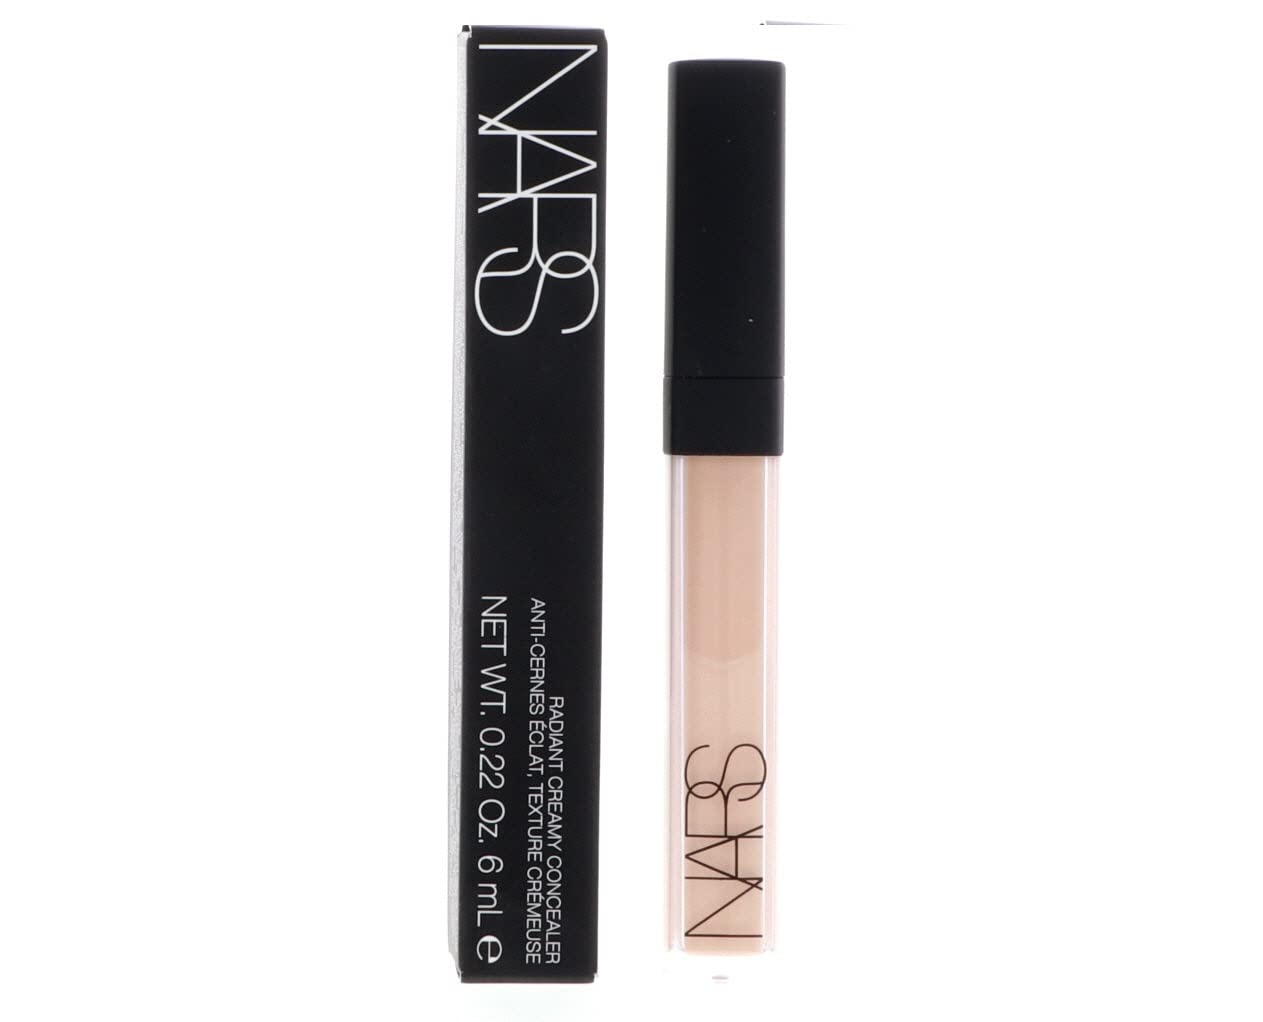 NARS Radiant Creamy Concealer 6. #Custard : Yellow tone for light to medium complexion